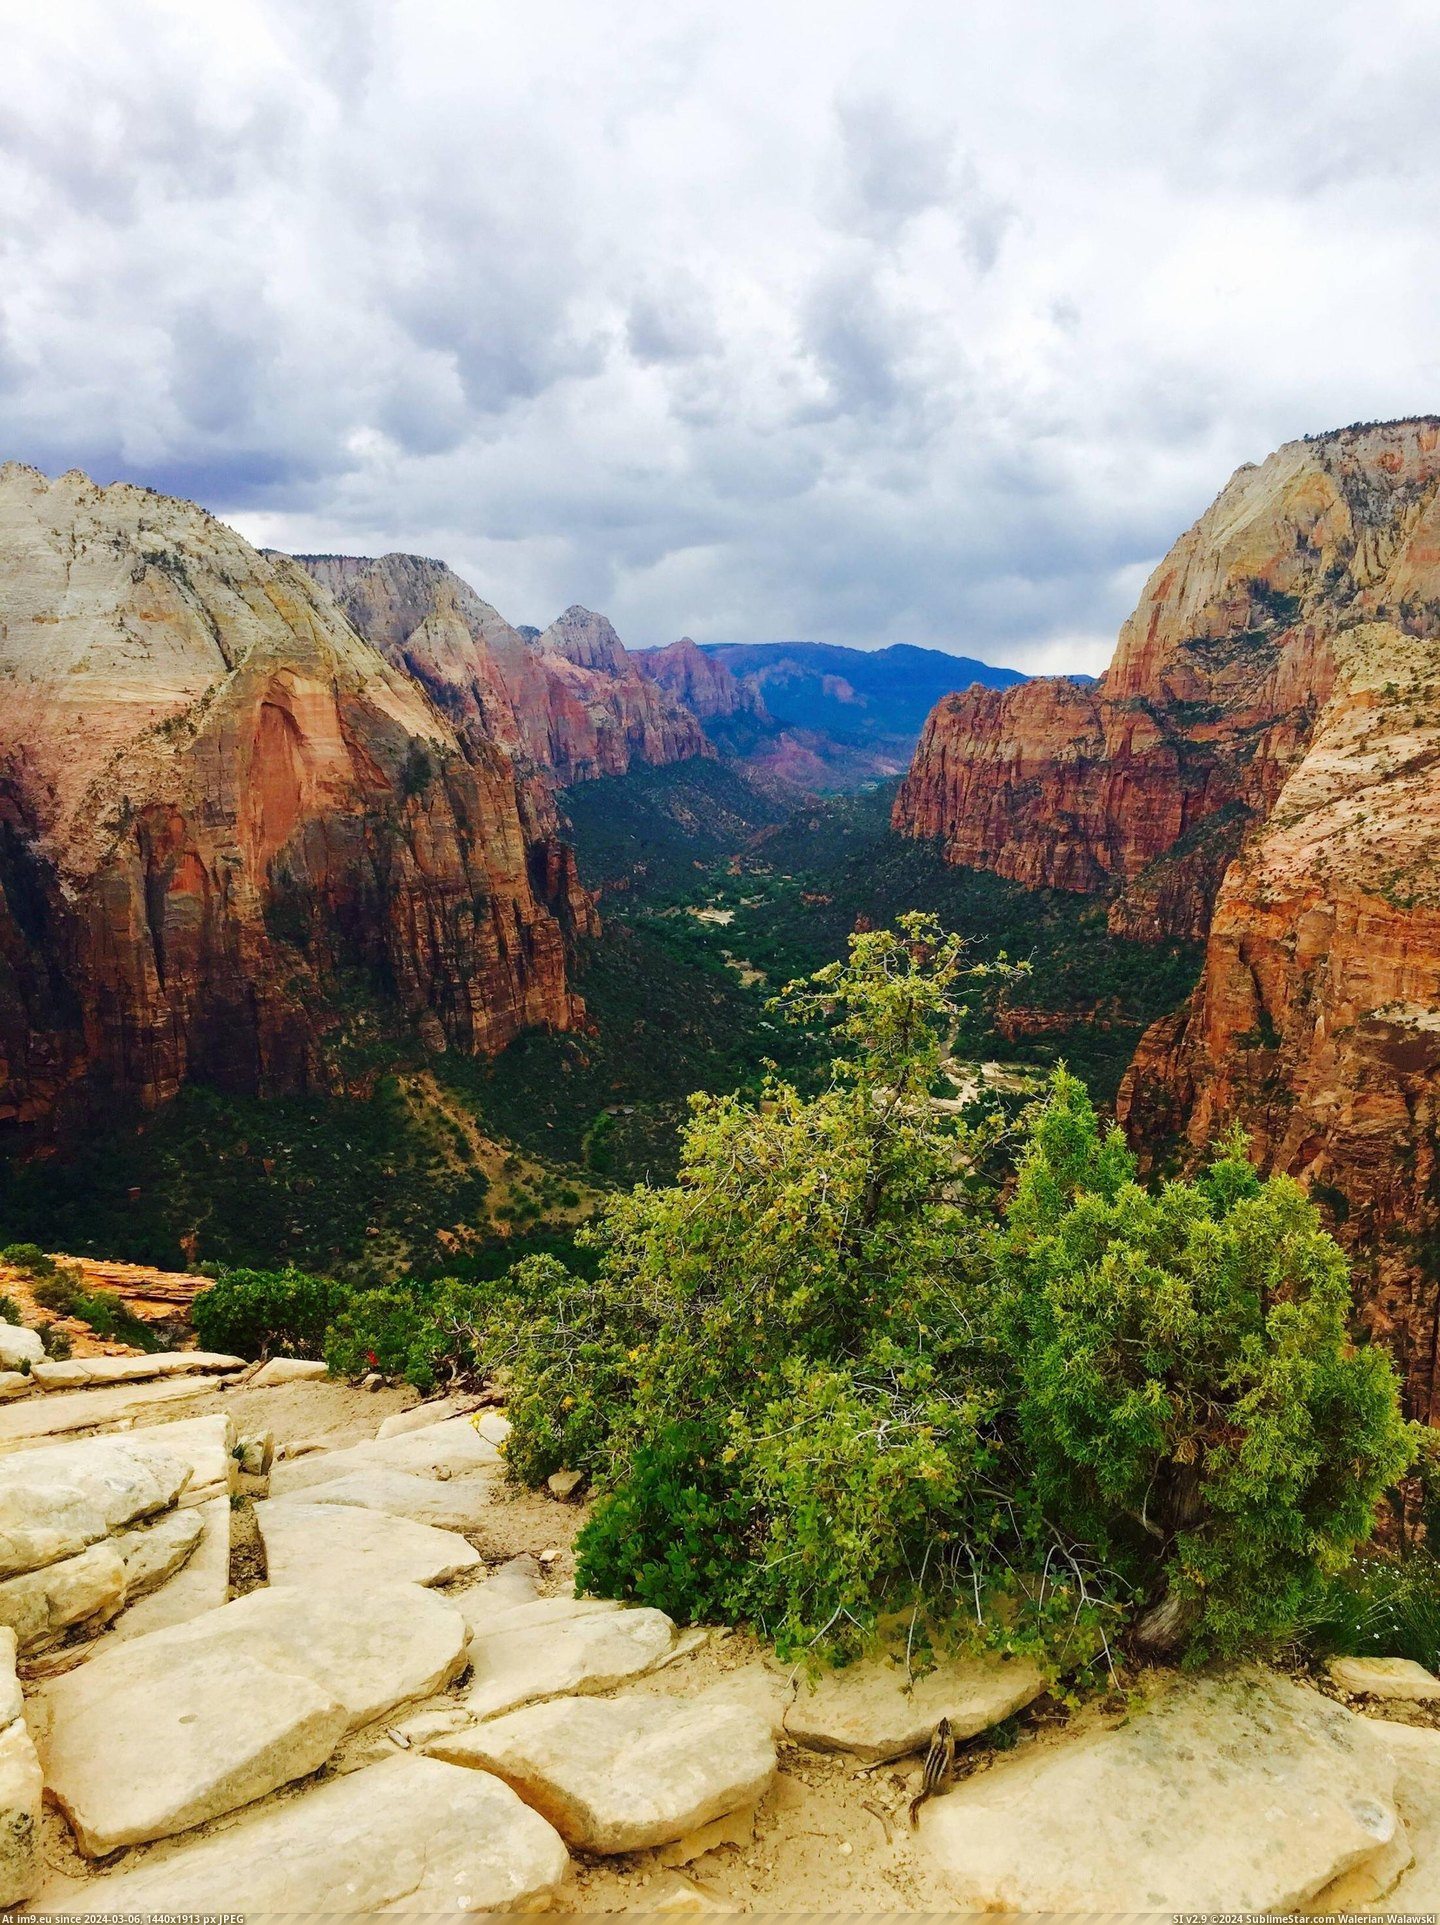 #Park #National #Storm #Zion #Approaching #Angels #Landing #Summit [Earthporn] A Storm Approaching the Summit of Angels Landing, Zion National Park [2203x2938] Pic. (Изображение из альбом My r/EARTHPORN favs))